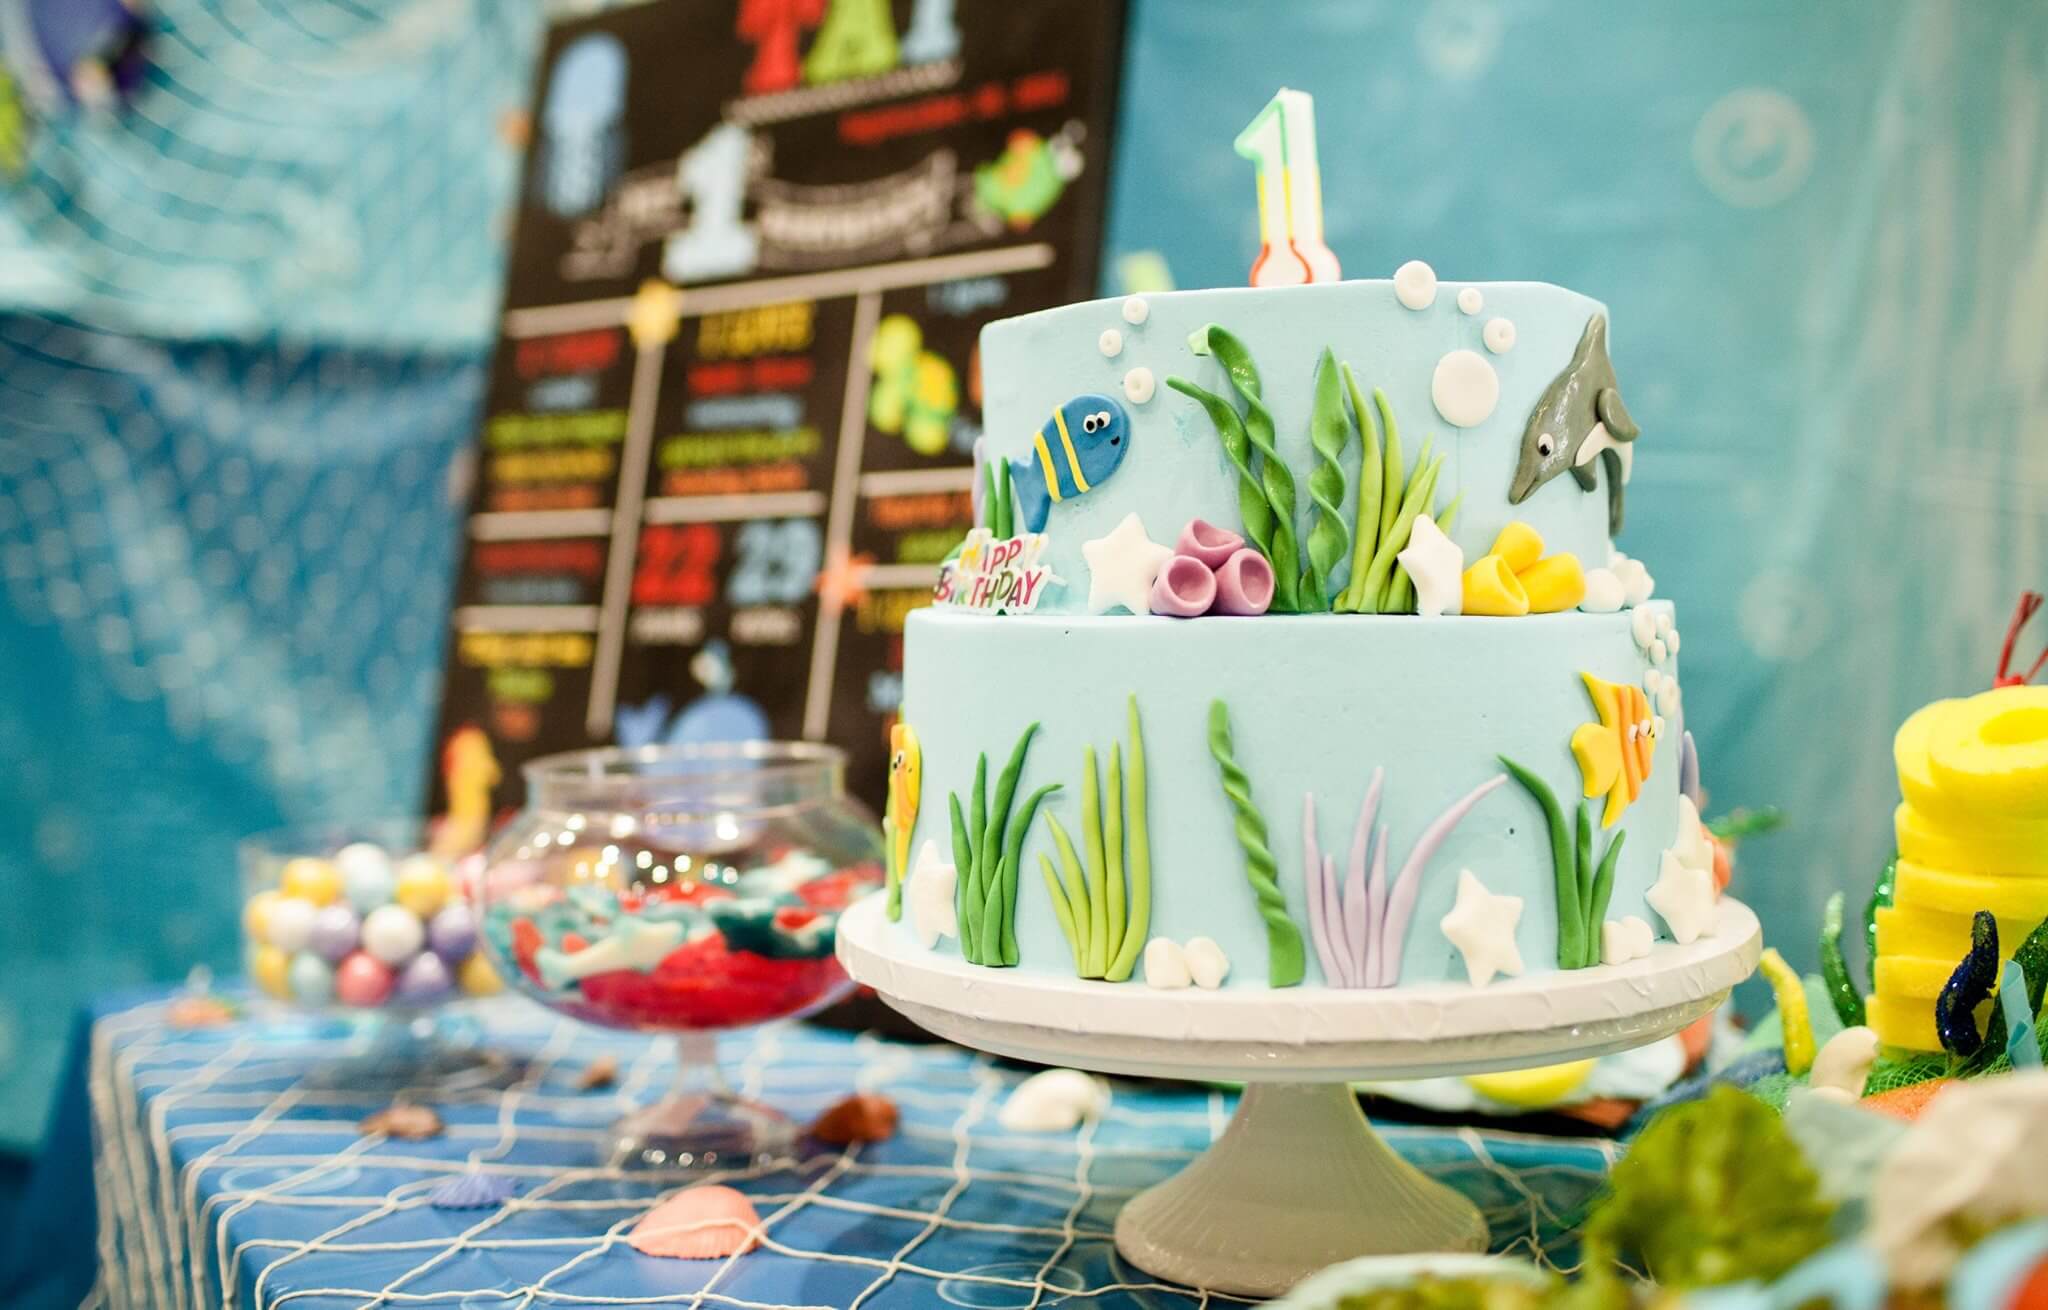 Under The Sea First Birthday Party Ideas That Will Make A Splash! - inAra  By May Pham